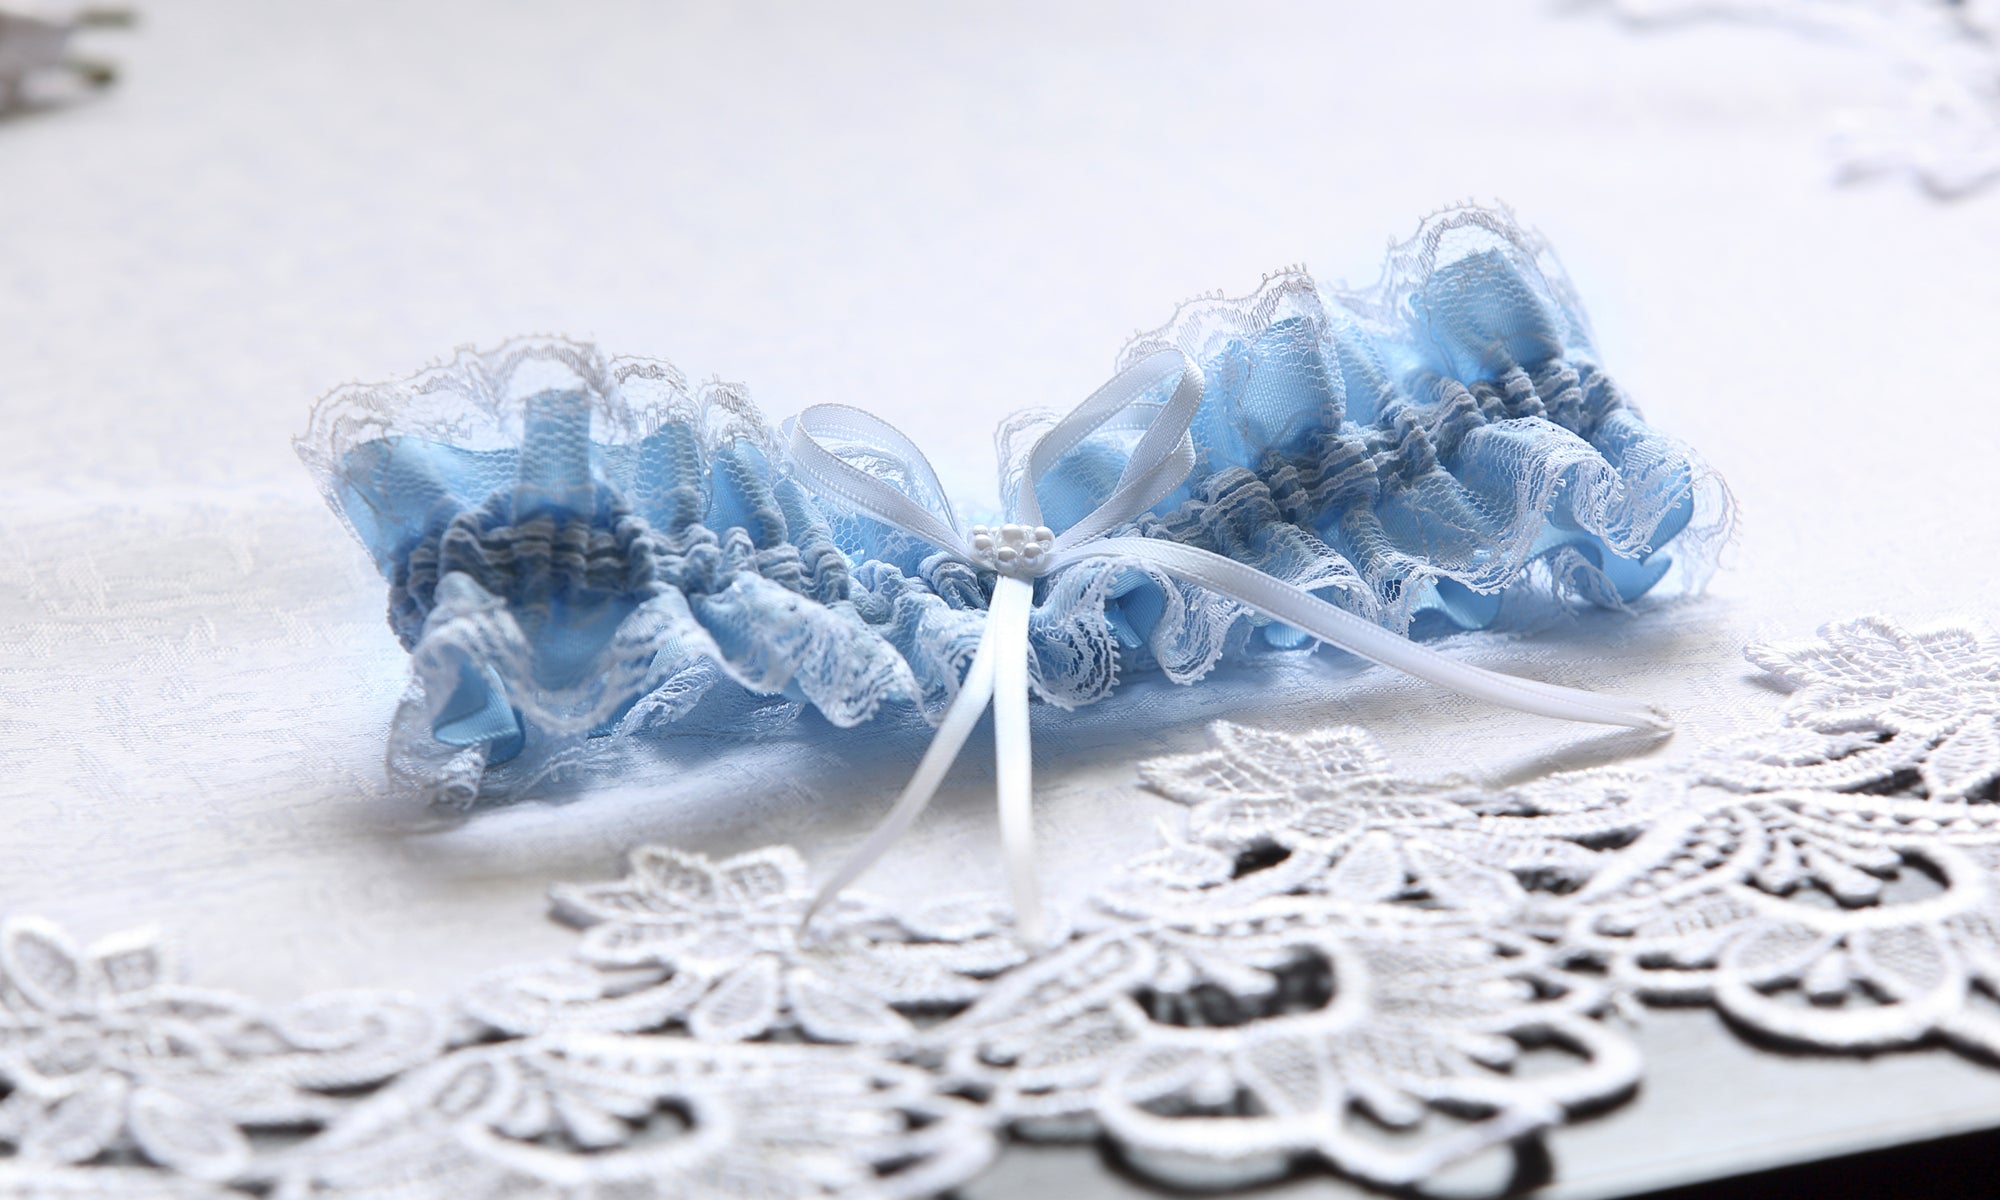 The Wedding Garter Tradition: What’s It All About and How to Choose One